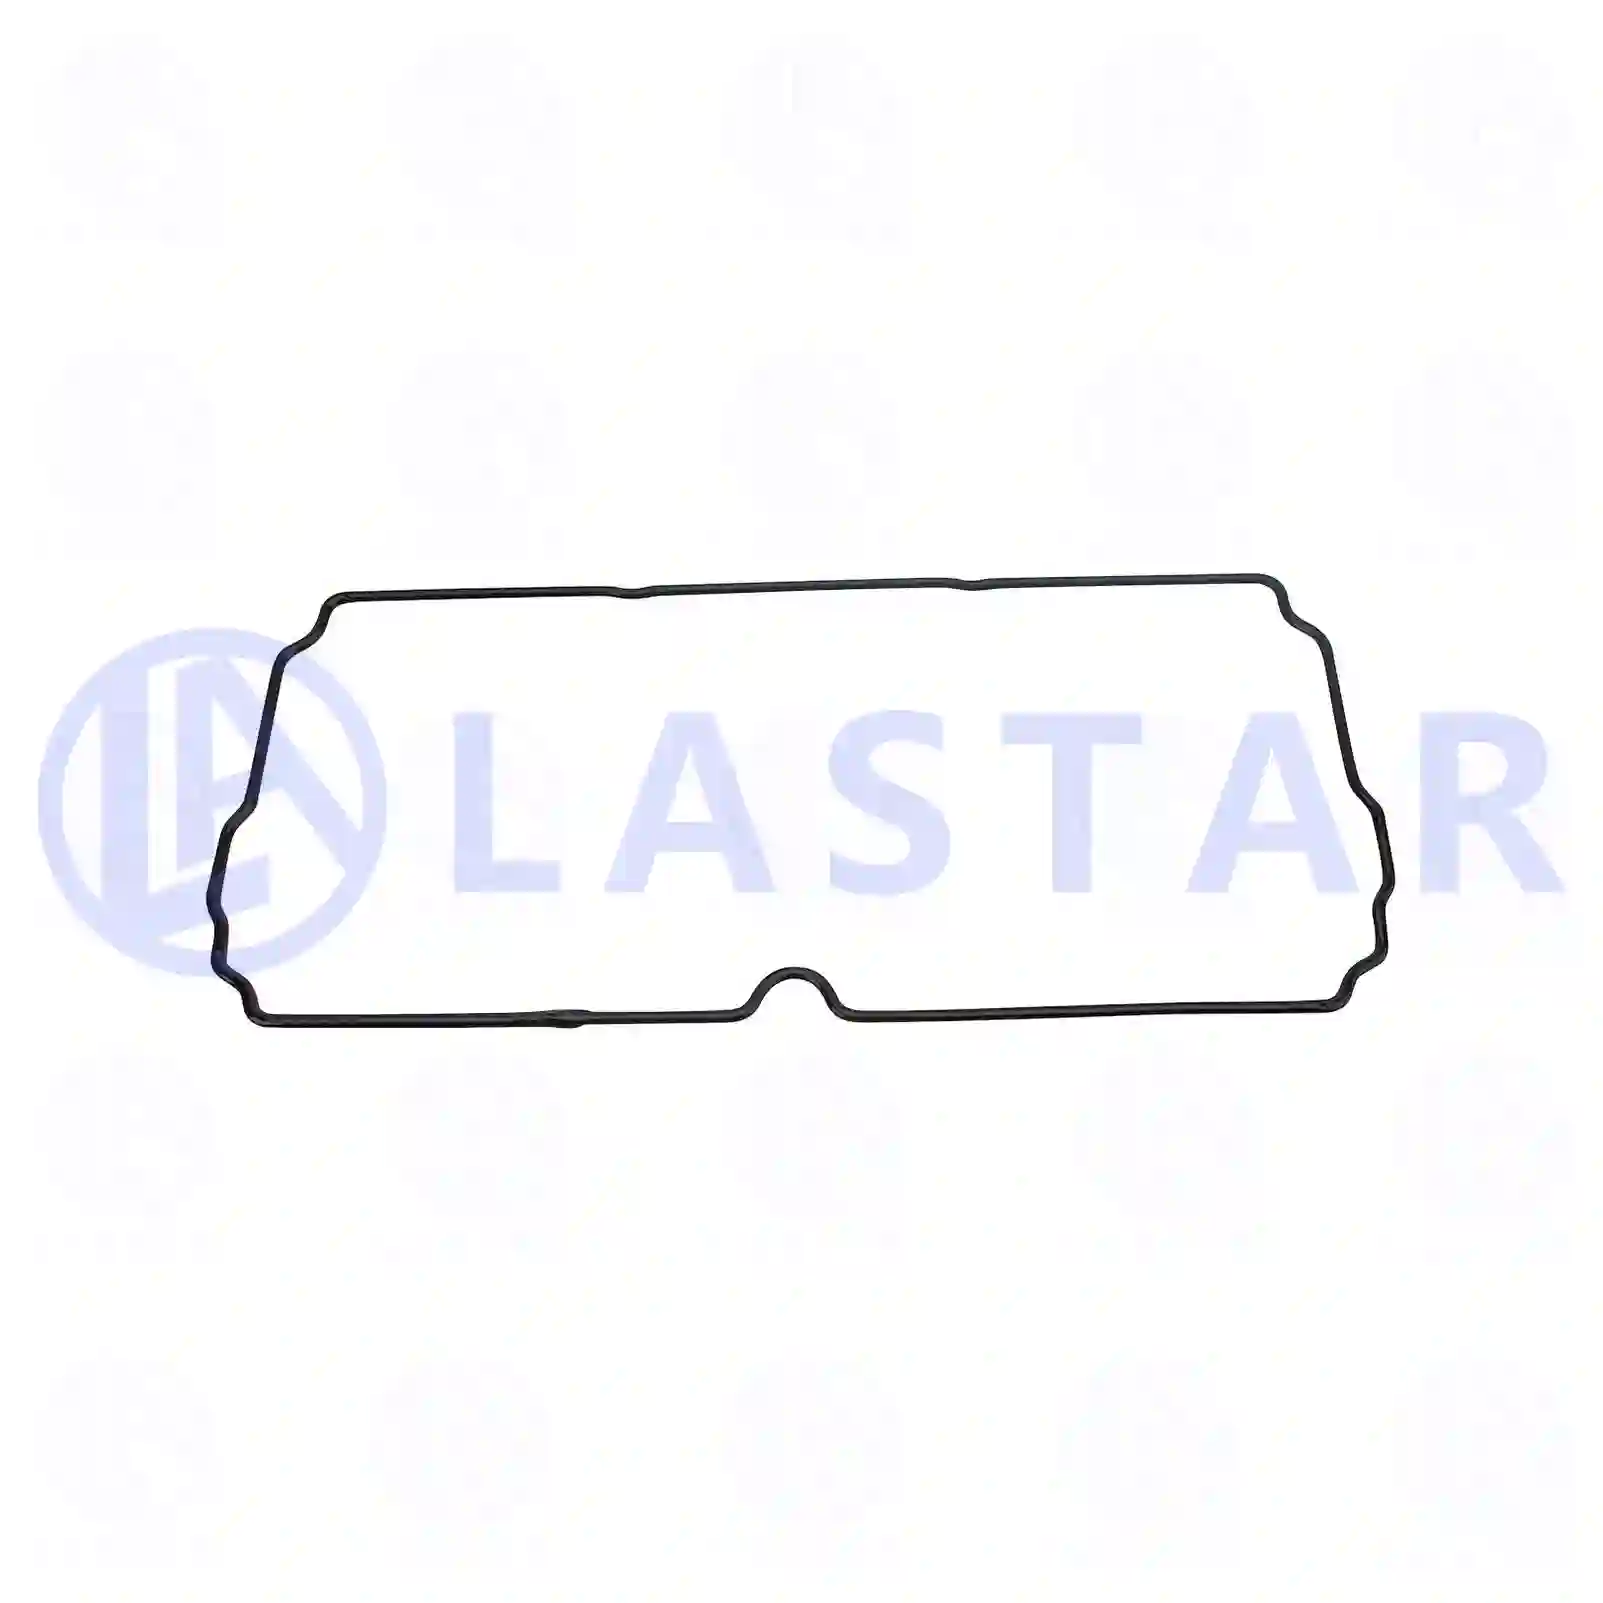 Gasket, side cover, 77704038, 1497061, ZG01263-0008 ||  77704038 Lastar Spare Part | Truck Spare Parts, Auotomotive Spare Parts Gasket, side cover, 77704038, 1497061, ZG01263-0008 ||  77704038 Lastar Spare Part | Truck Spare Parts, Auotomotive Spare Parts